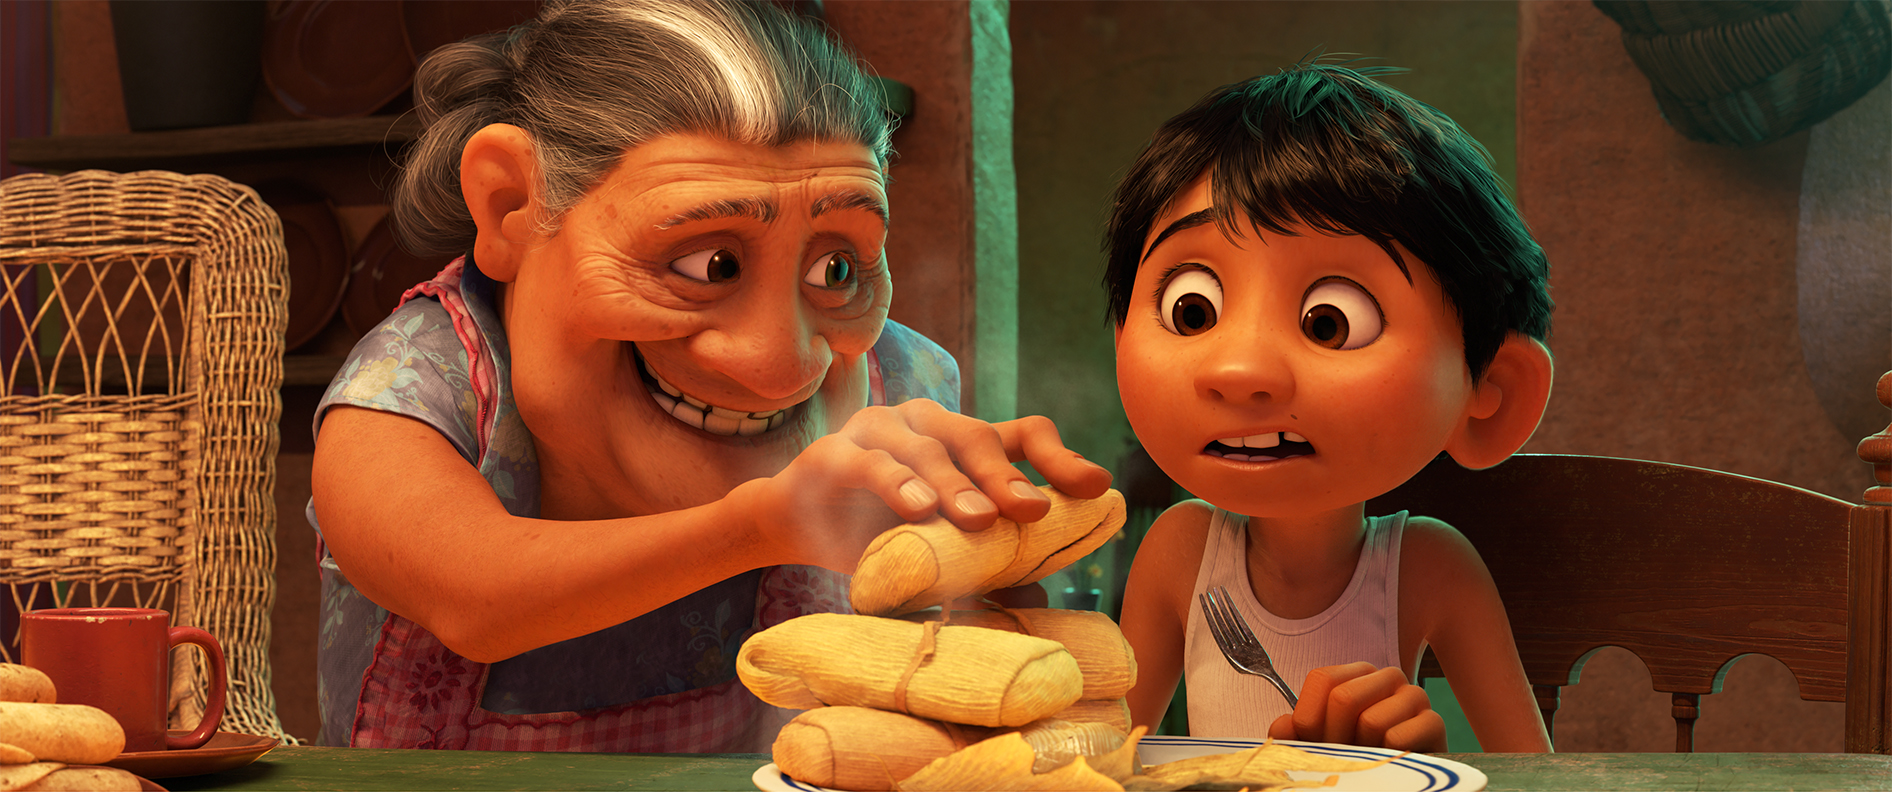 MORE TAMALES -- In Disney•Pixar’s “Coco,” Abuelita—Miguel’s loving grandmother—runs the Rivera household like Mamá Imelda did two generations before her. Their philosophy is simple: Work in the family shoemaking business, eat more tamales and, most importantly, “No music!” Featuring the voices of Renée Victor as Abuelita and Anthony Gonzalez as Miguel, Disney•Pixar’s “Coco” opens in U.S. theaters on Nov. 22, 2017. ©2017 Disney•Pixar. All Rights Reserved.